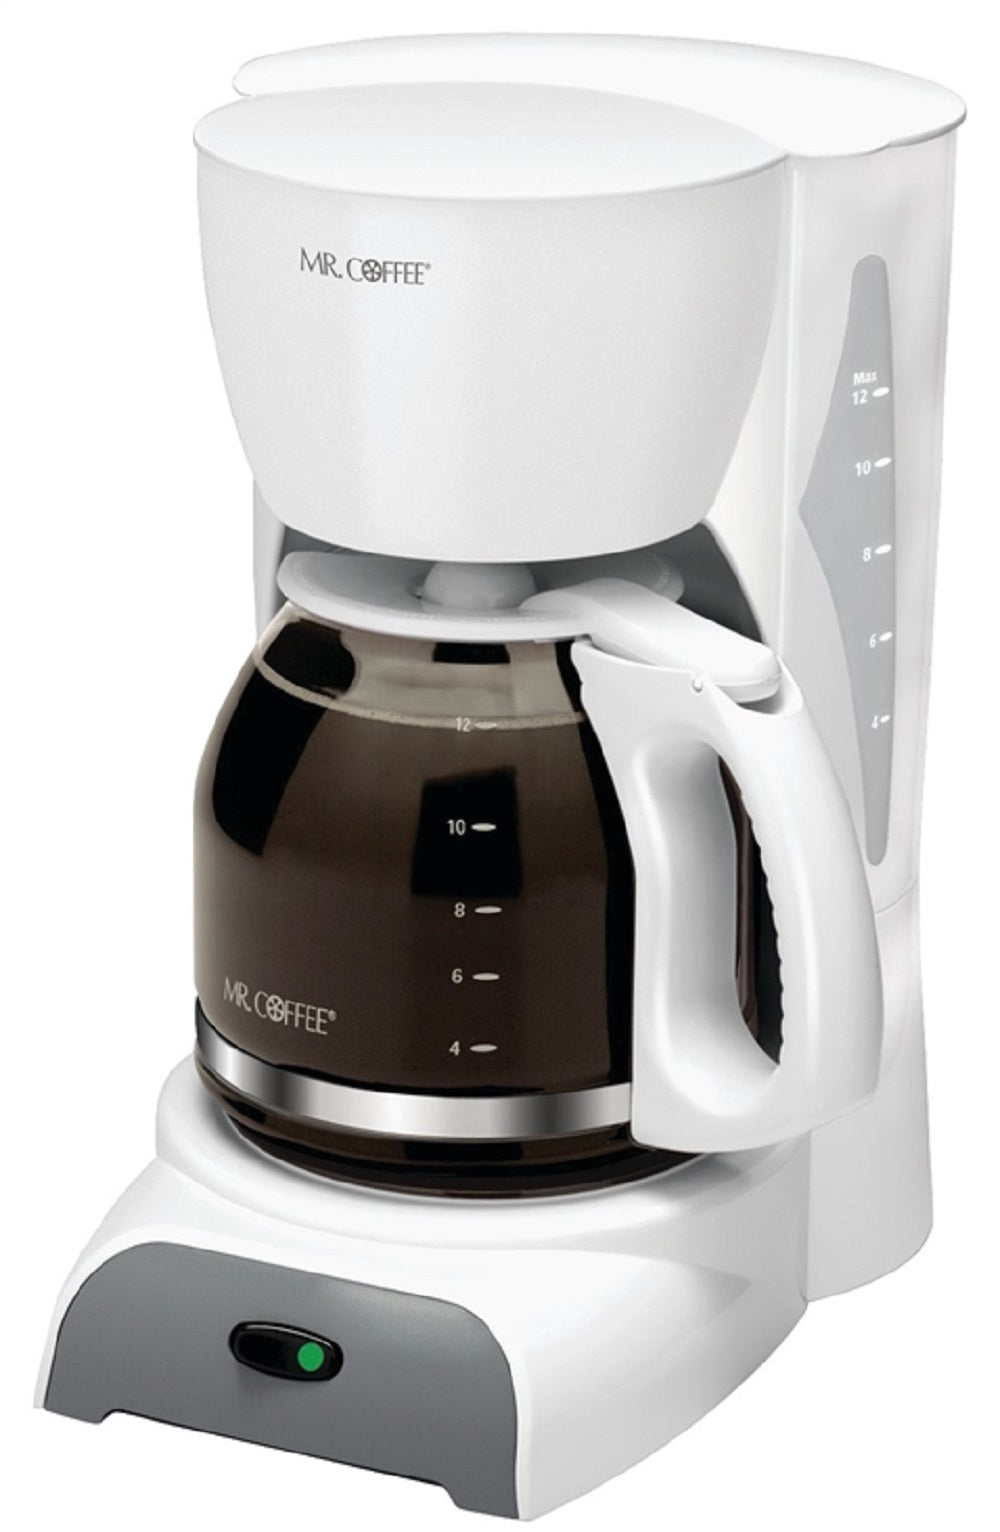 Mr. Coffee SK12-RB Coffeemaker, 12-Cup, White